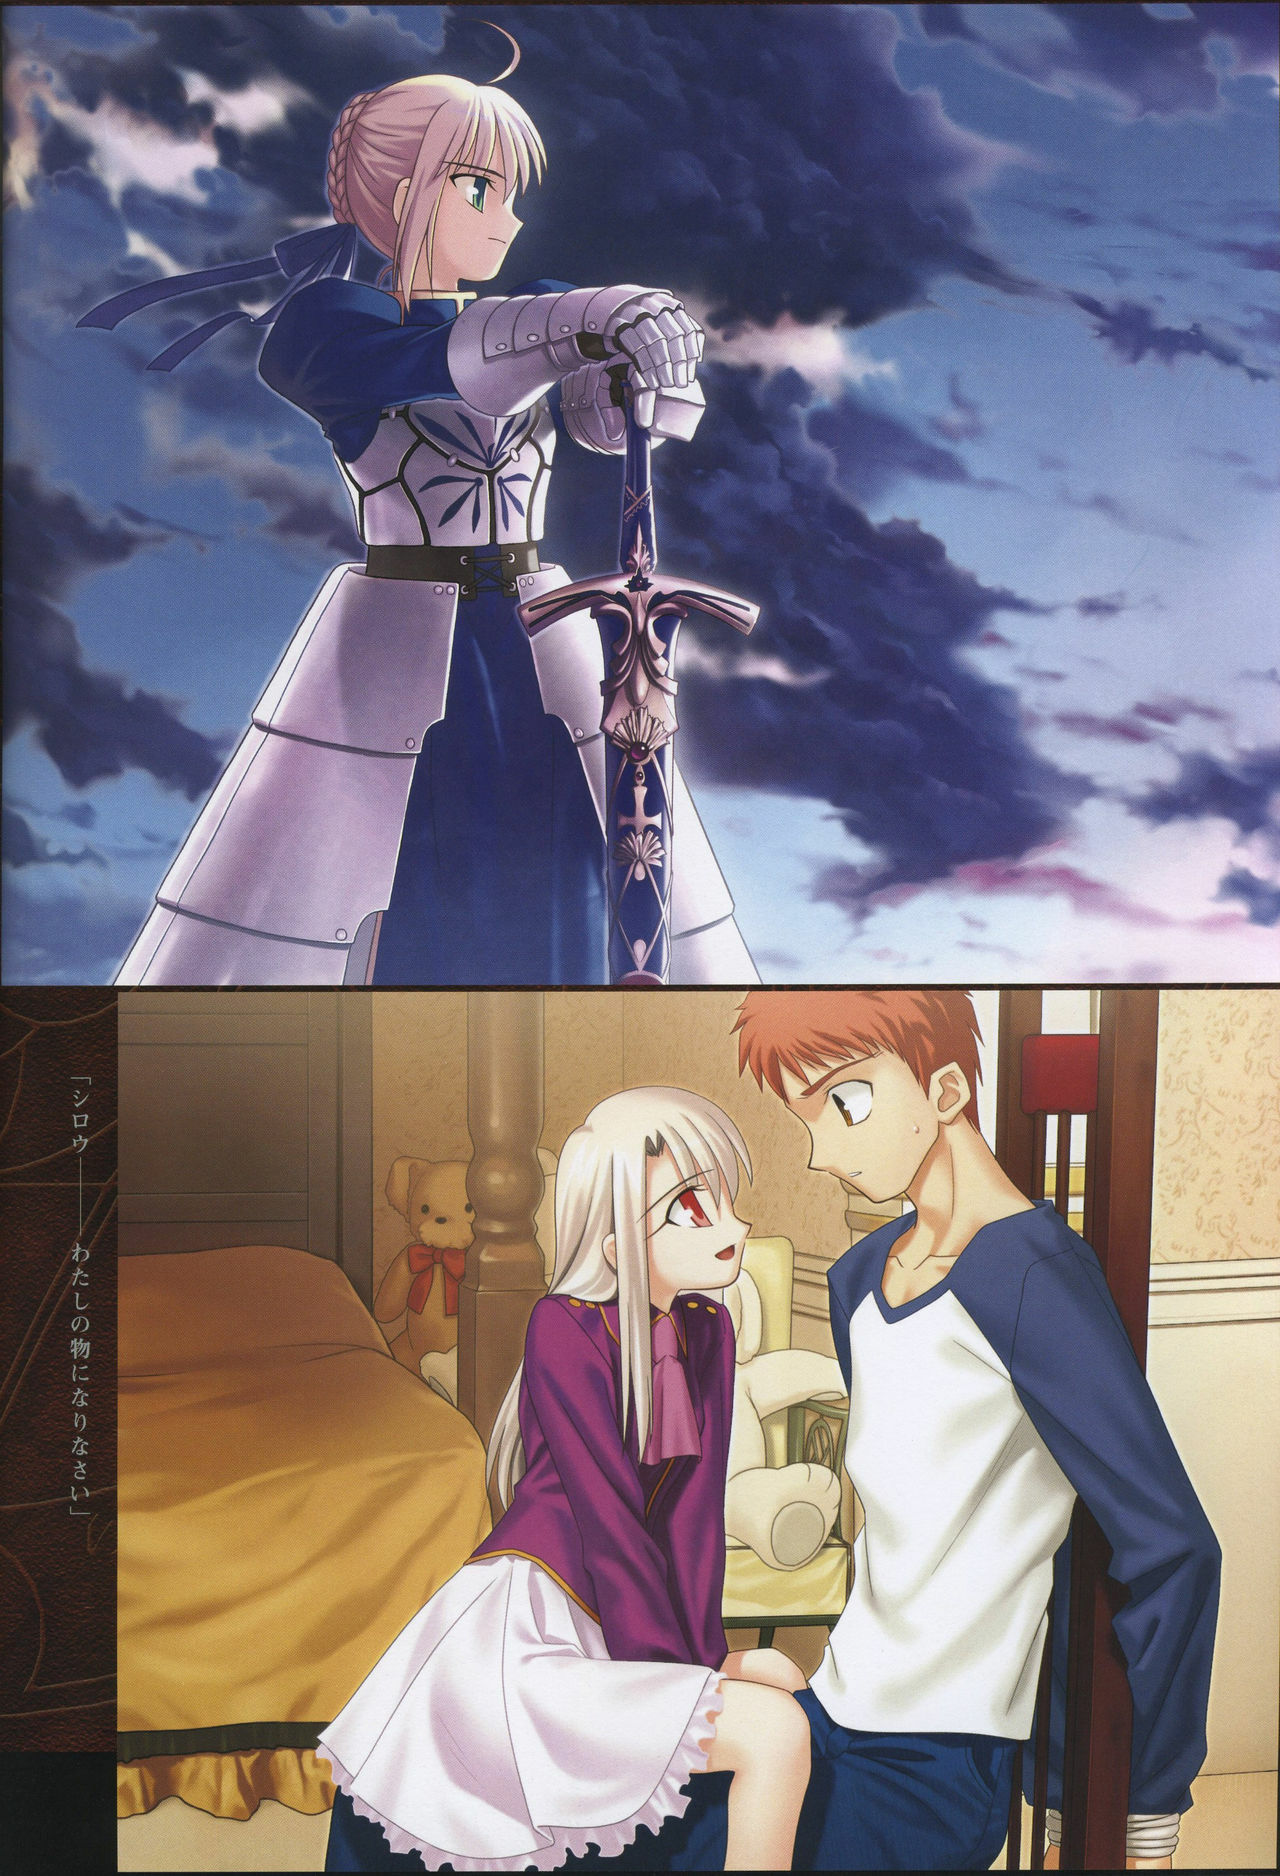 [Type-Moon] Fate/complete material I - Art material. page 28 full